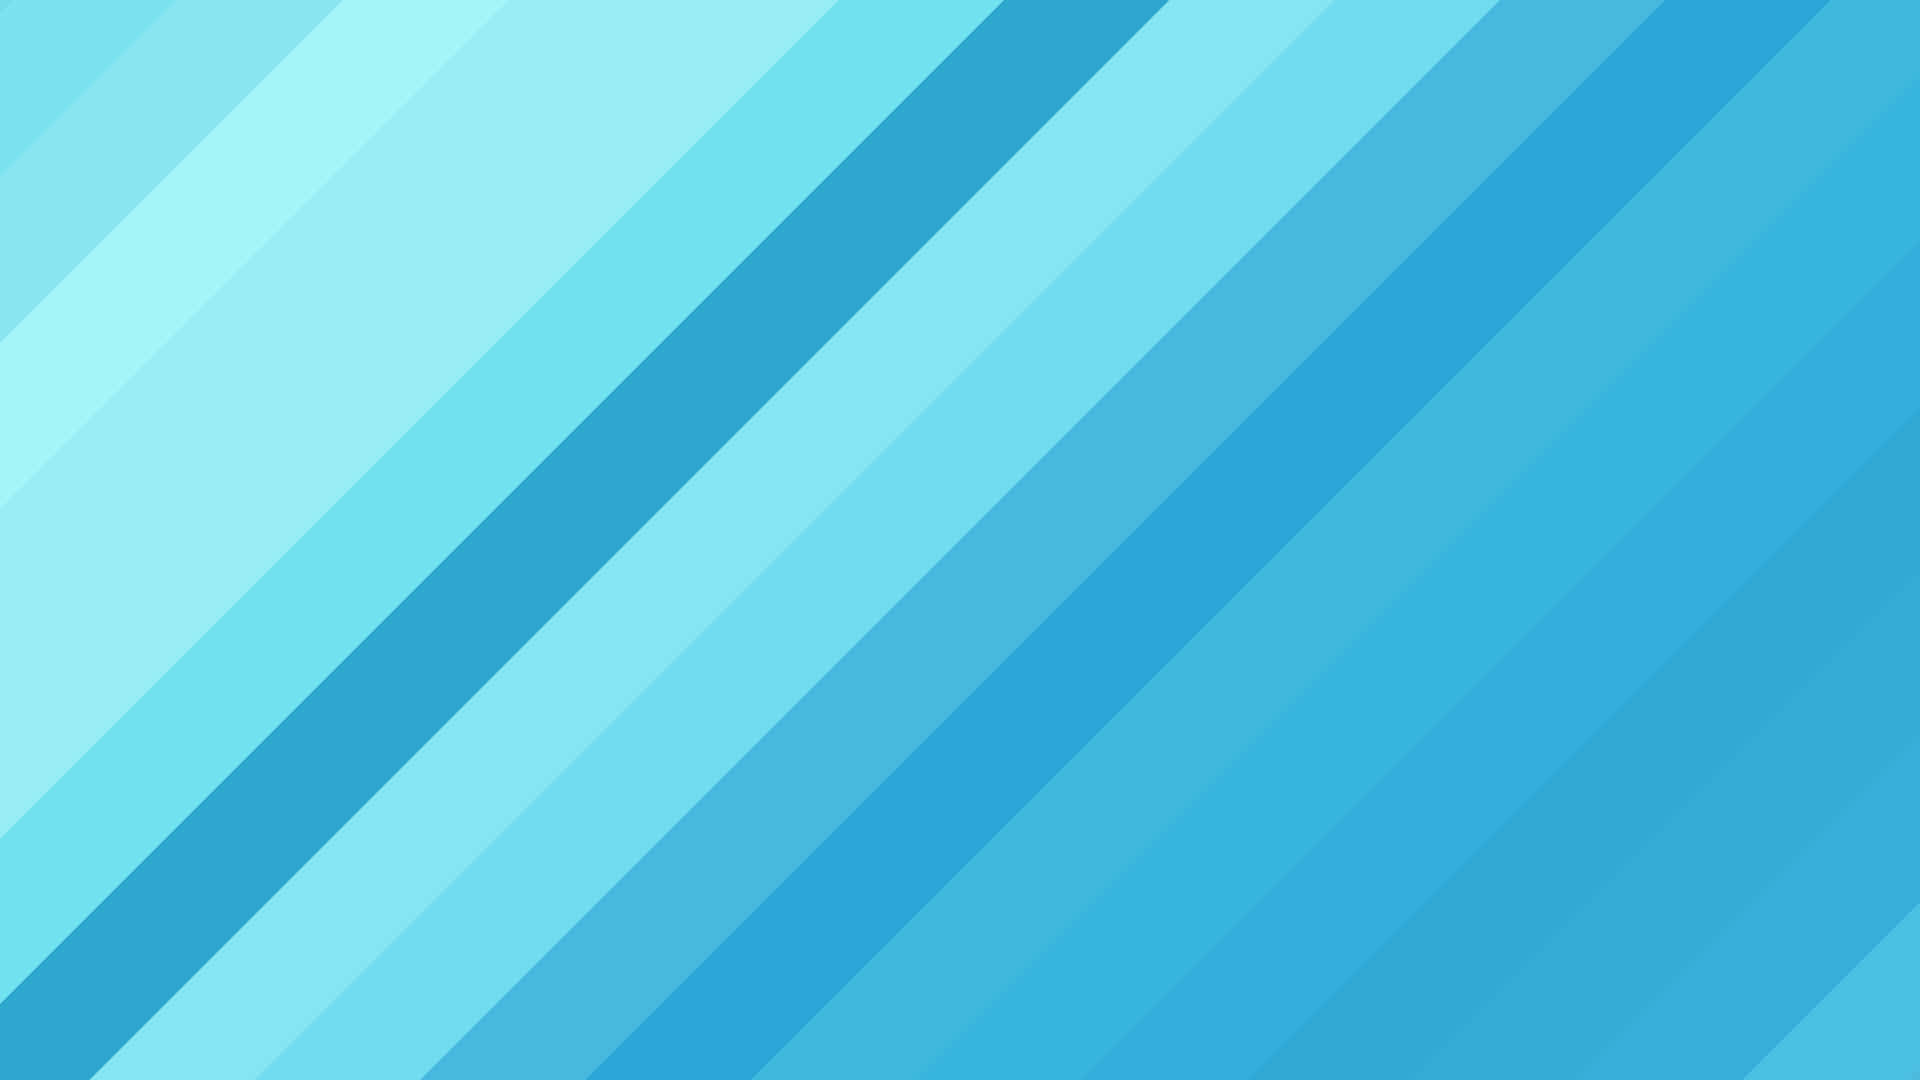 Classic, Colorful and Fun - A Stripes Background